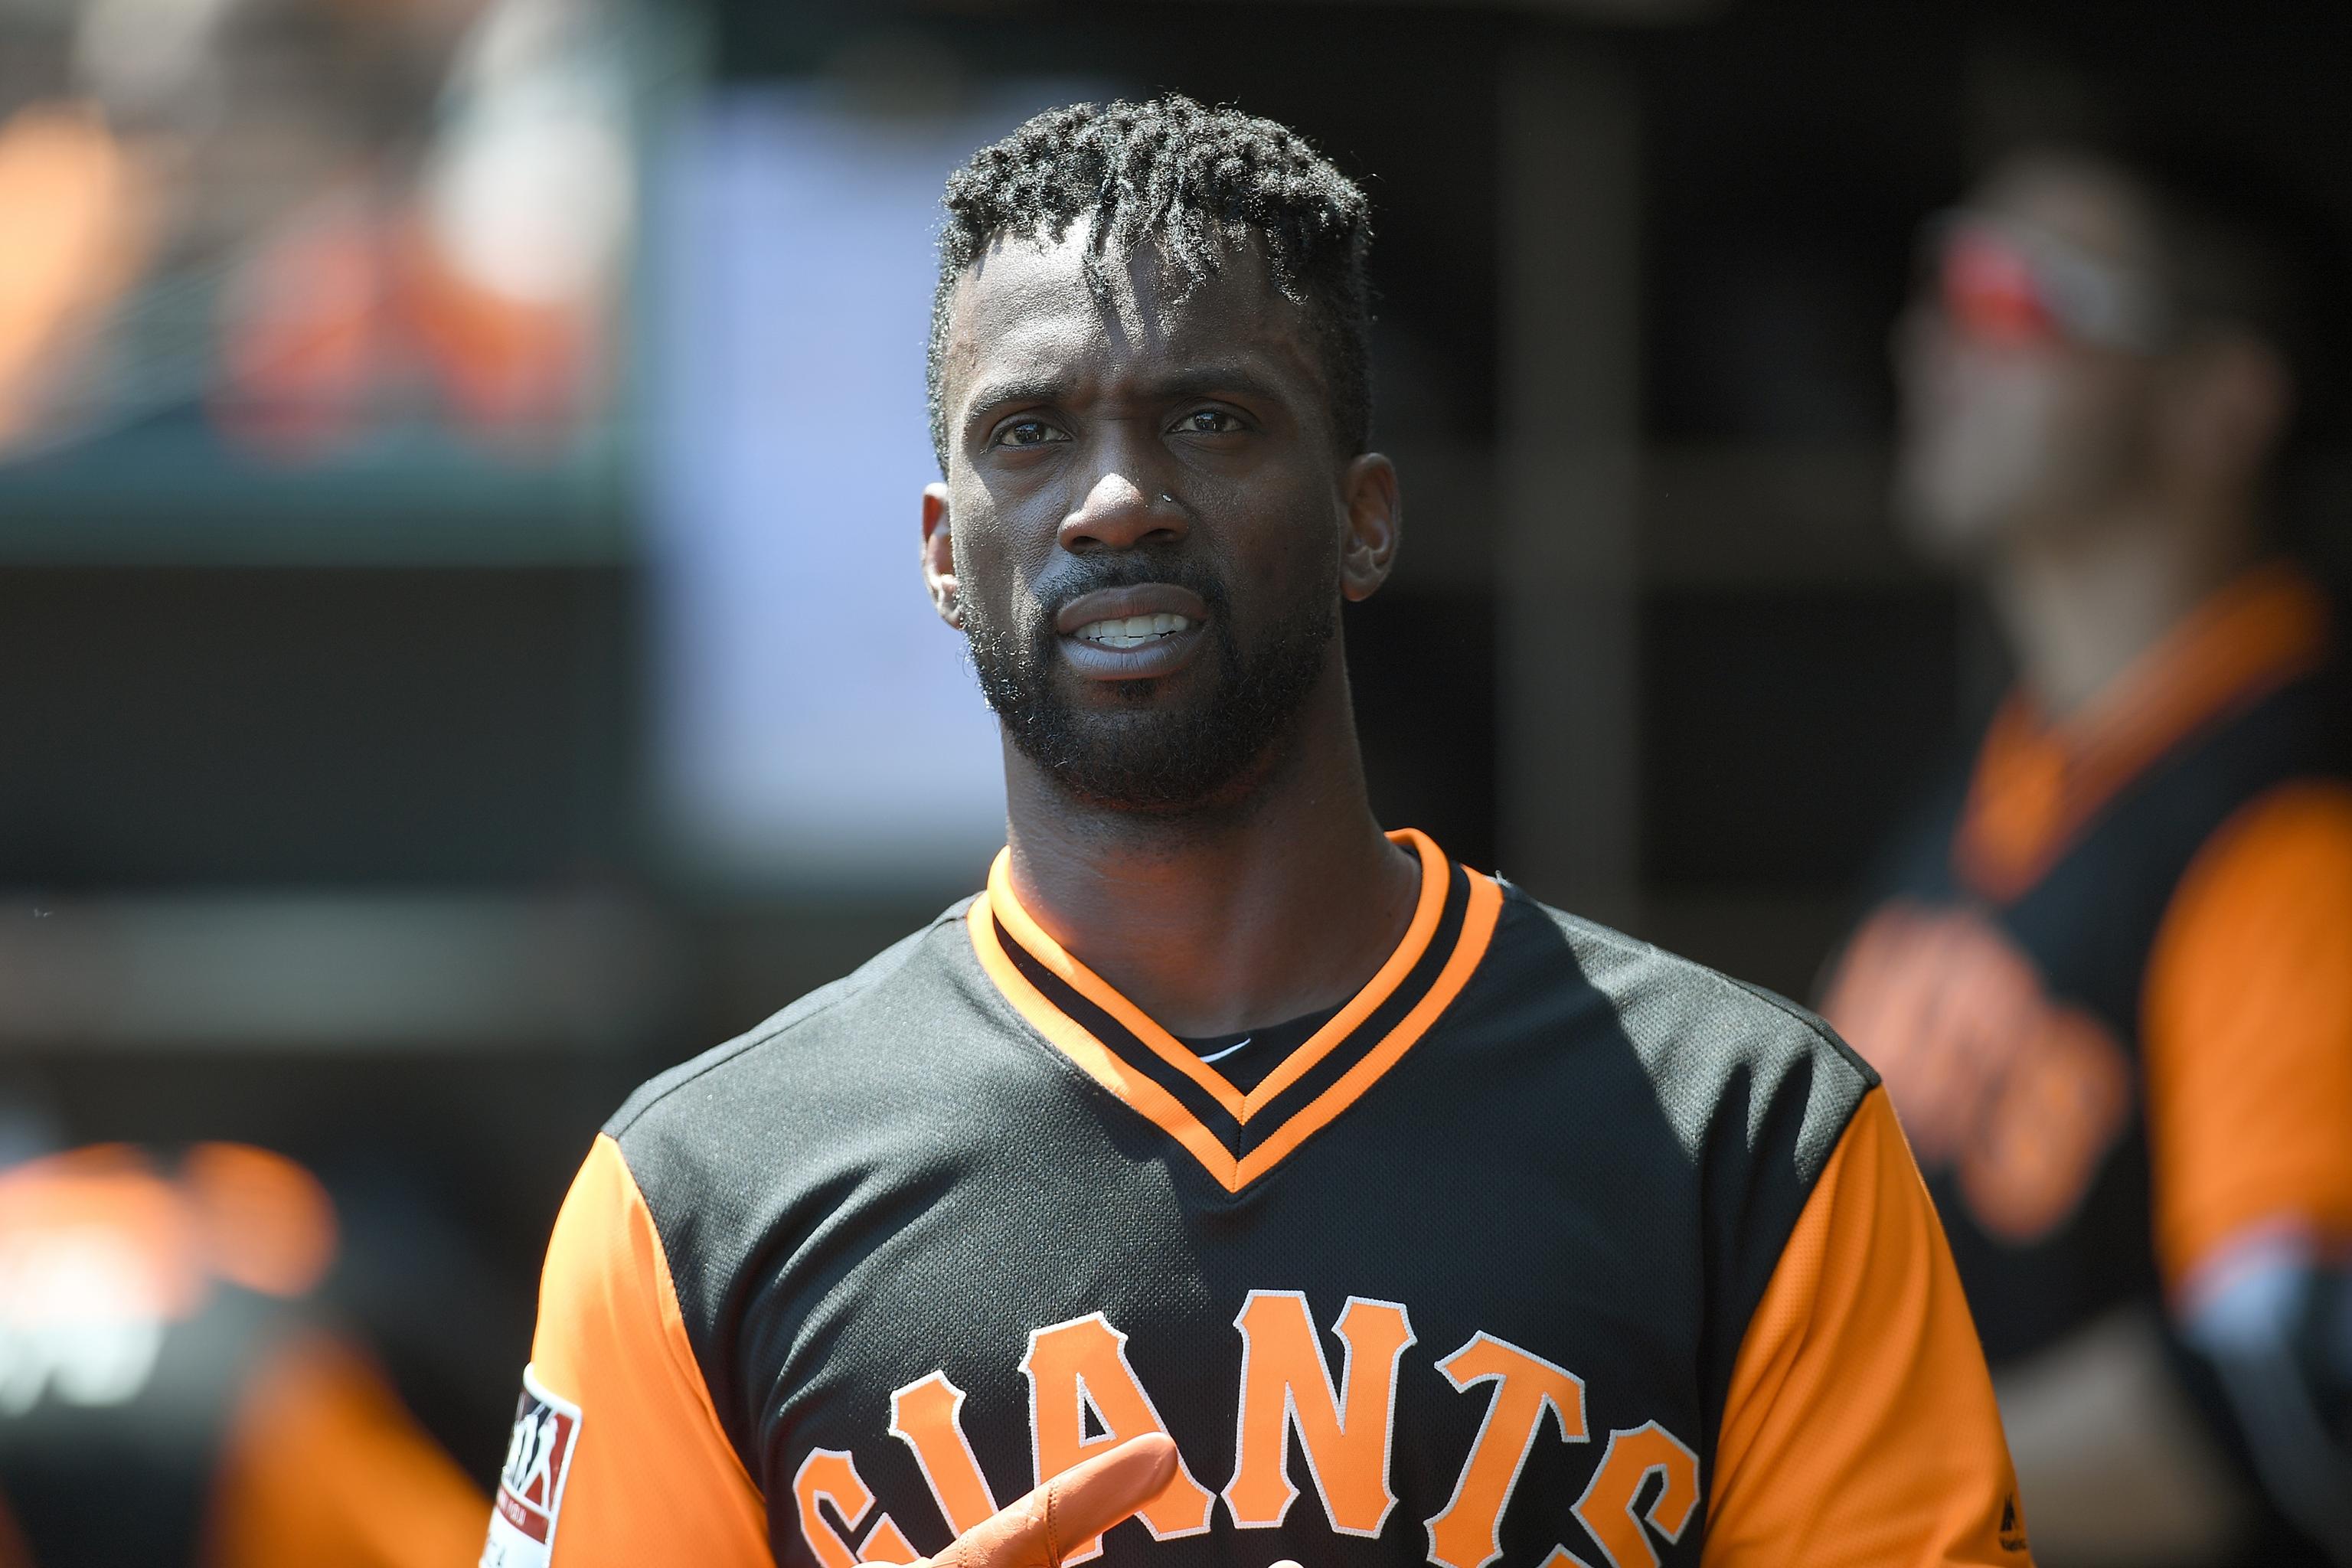 Andrew McCutchen has a new team after Yankees stint – New York Daily News